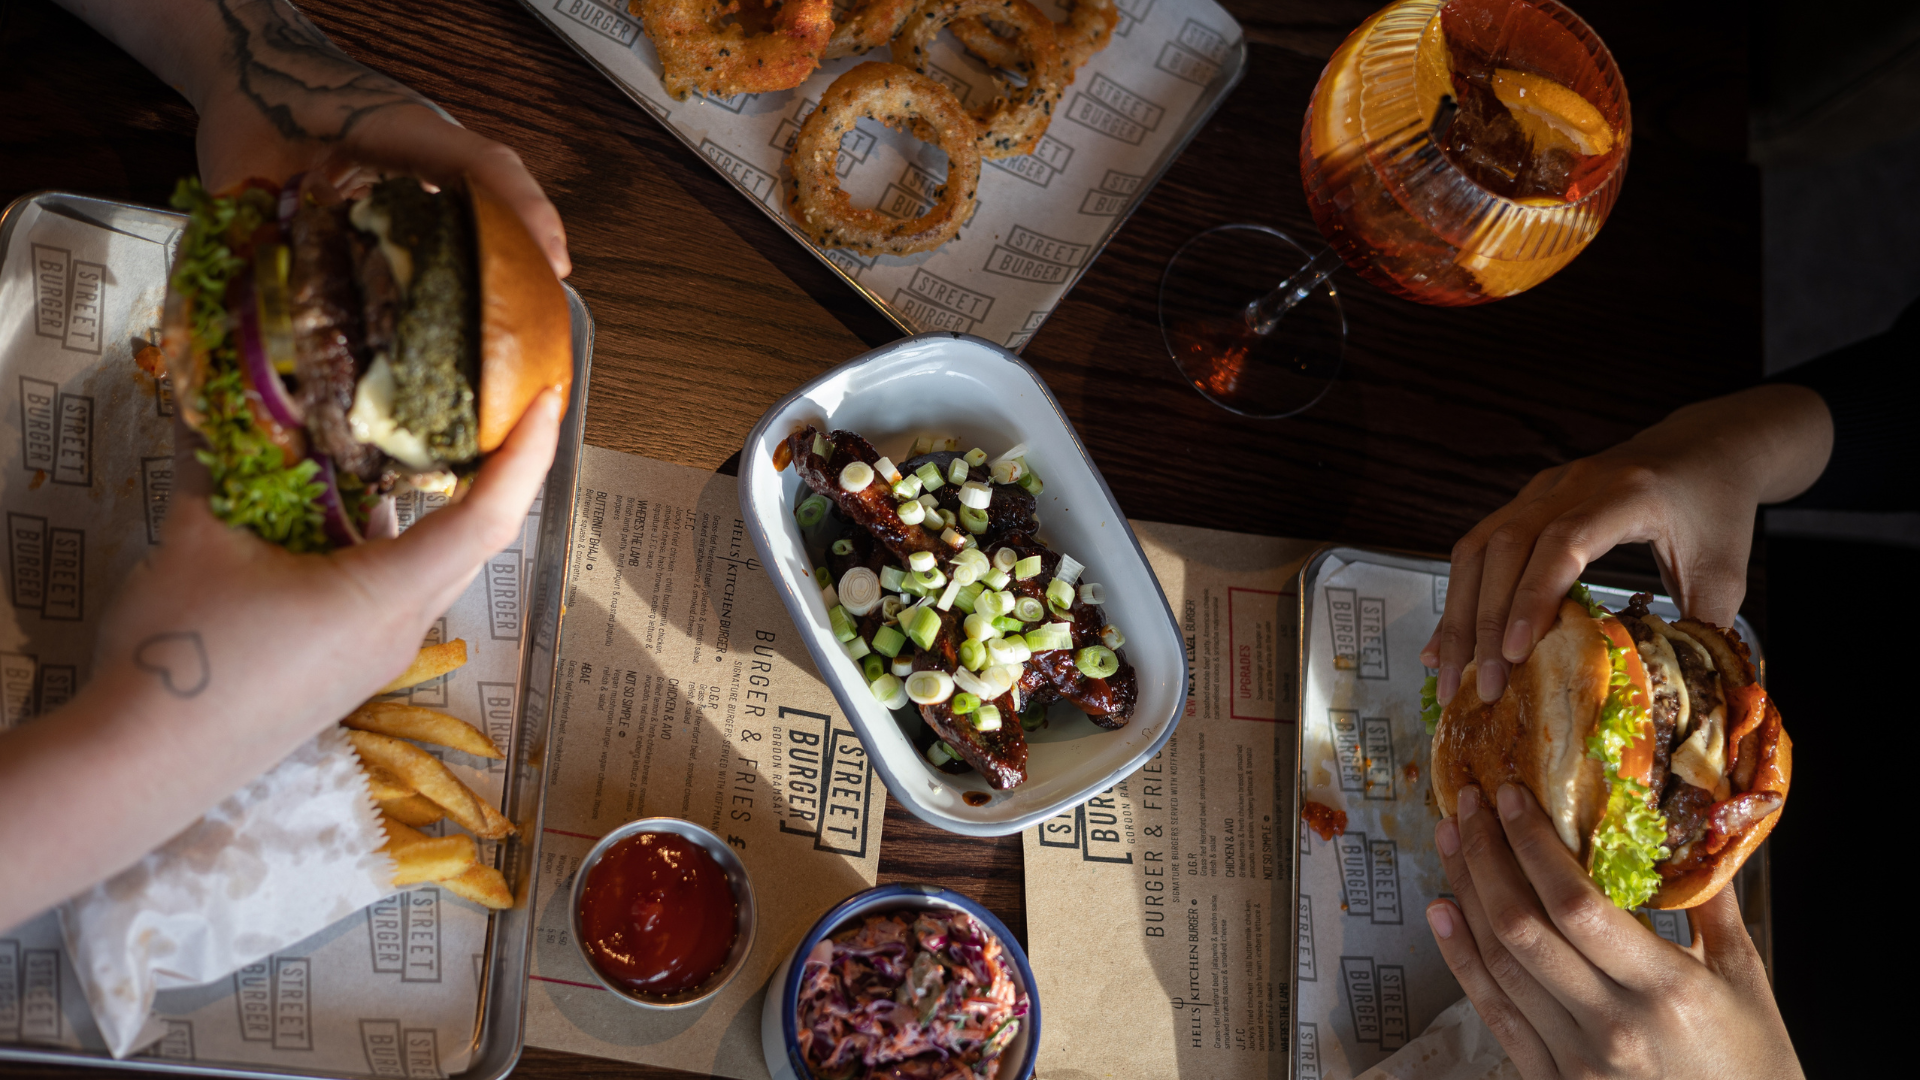 Spread of food for two people, including two burgers being held, chocolate bbq wings in middle of table, and onion rings, coleslaw, seasoned fries and cocktail on the side